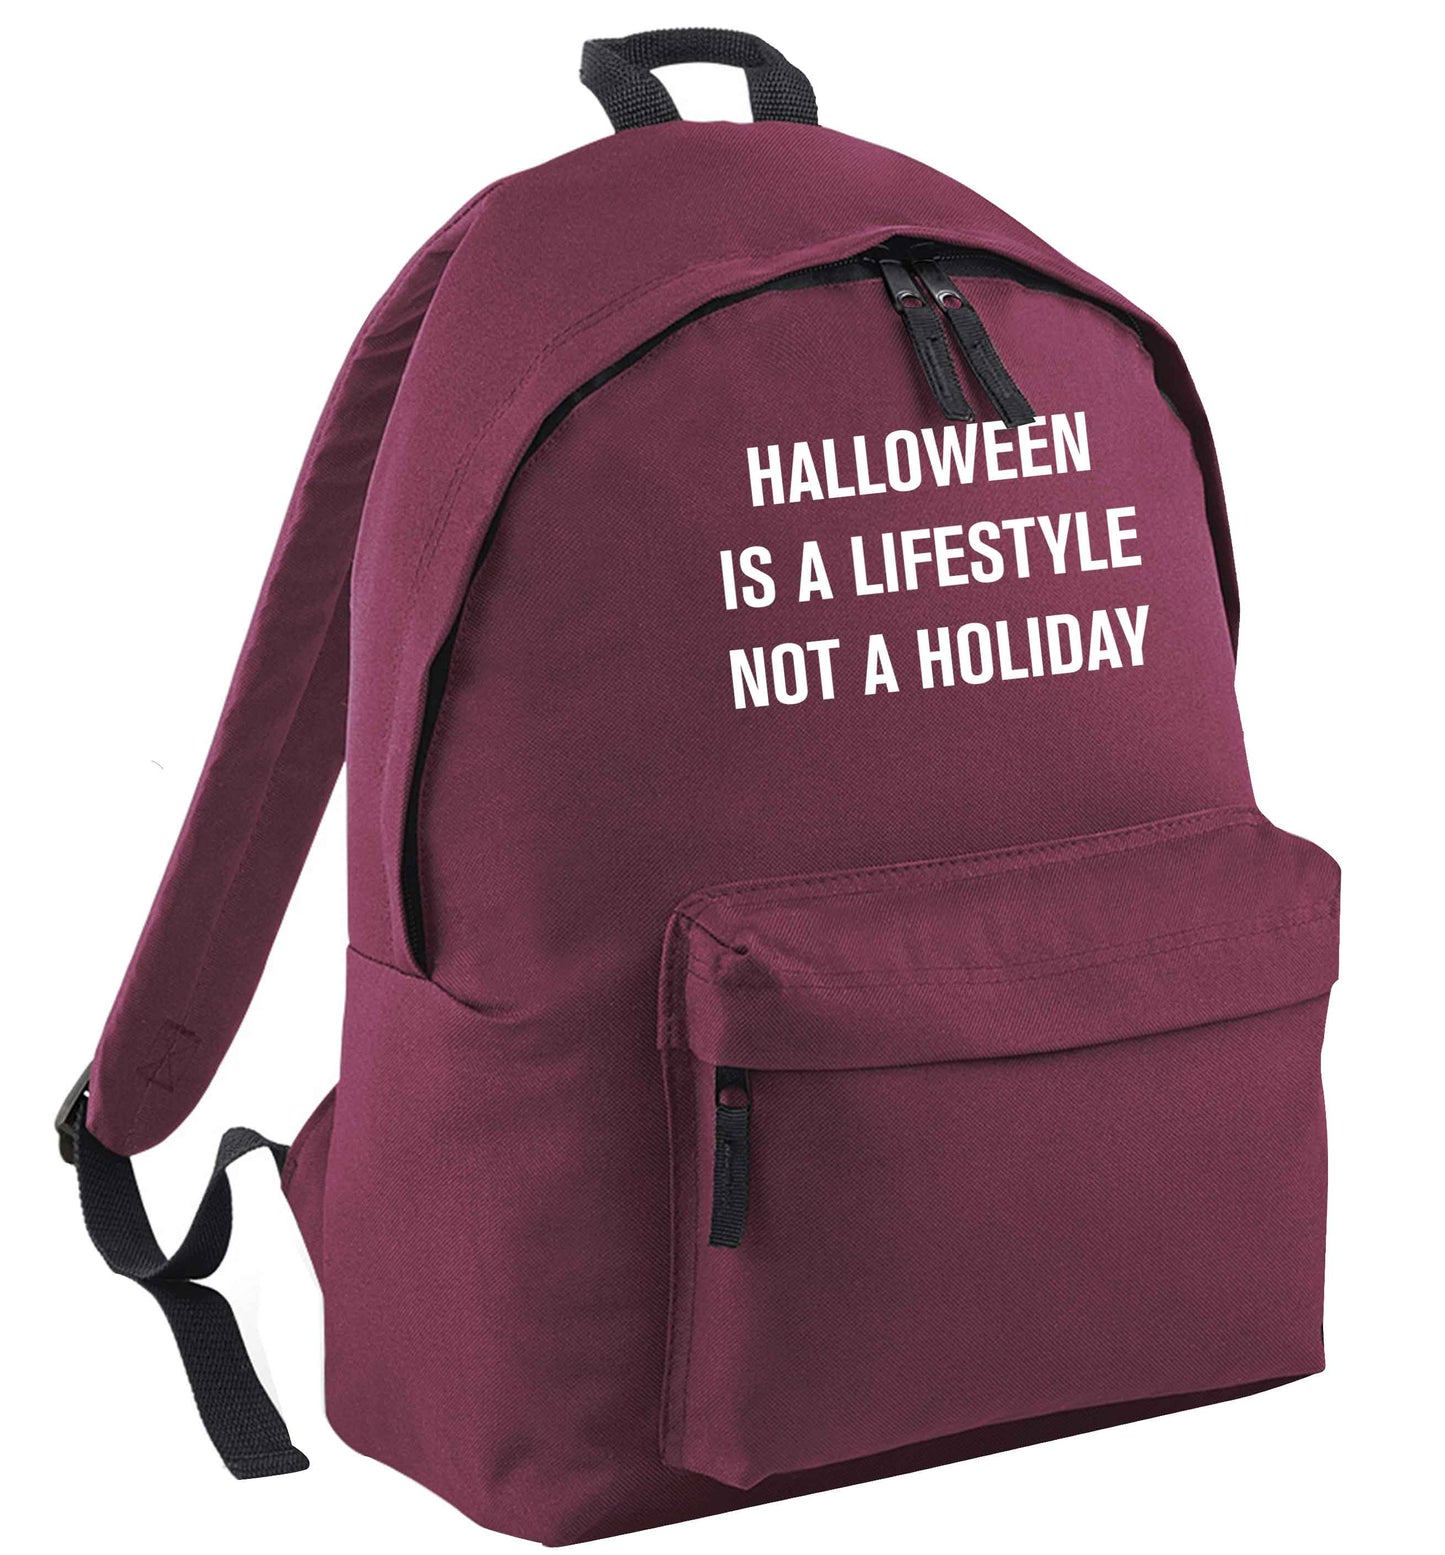 Halloween is a lifestyle not a holiday | Children's backpack